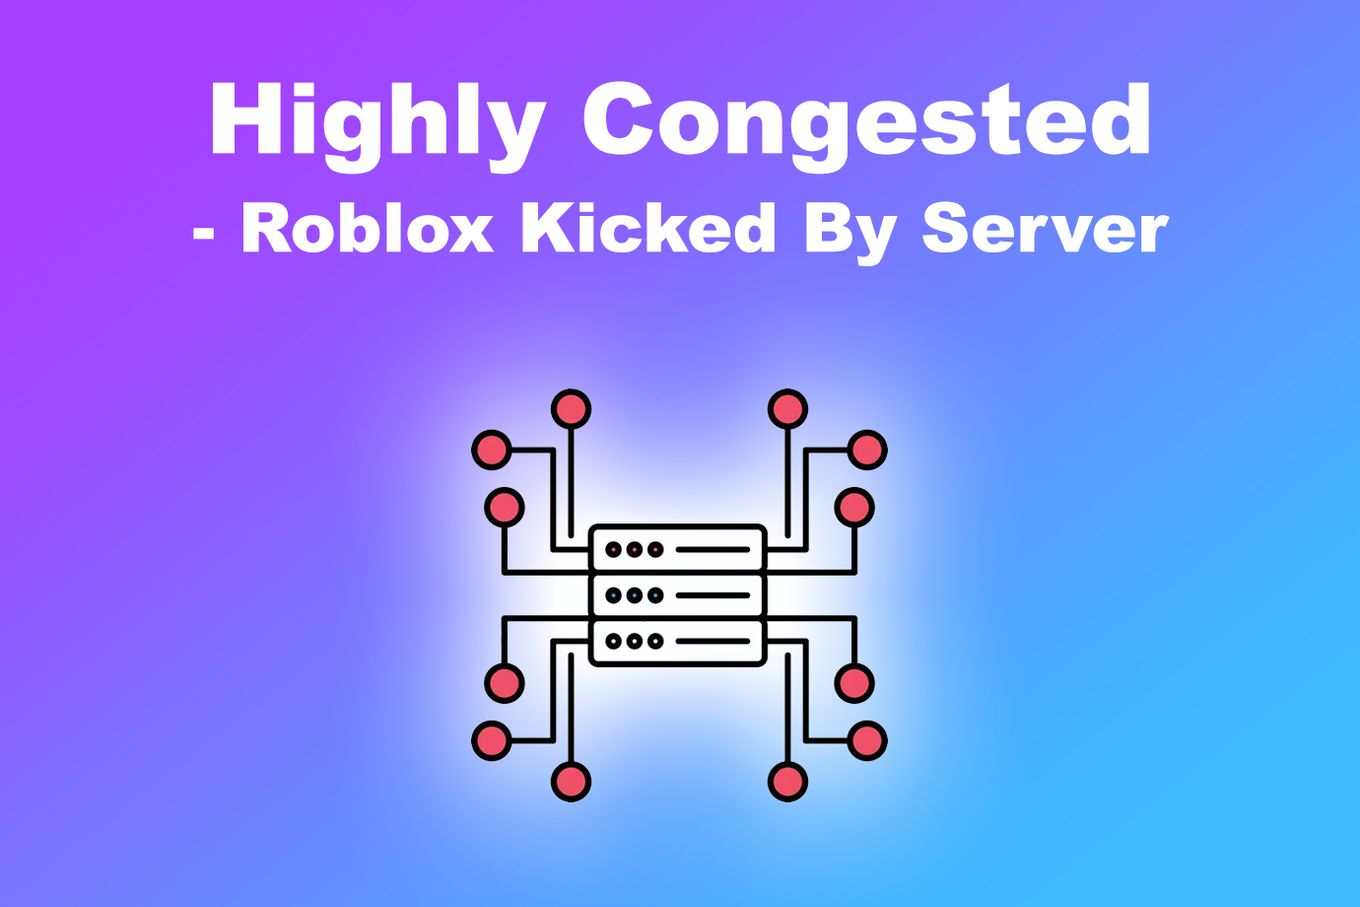 How to rejoin a Roblox server I've been kicked from - Quora